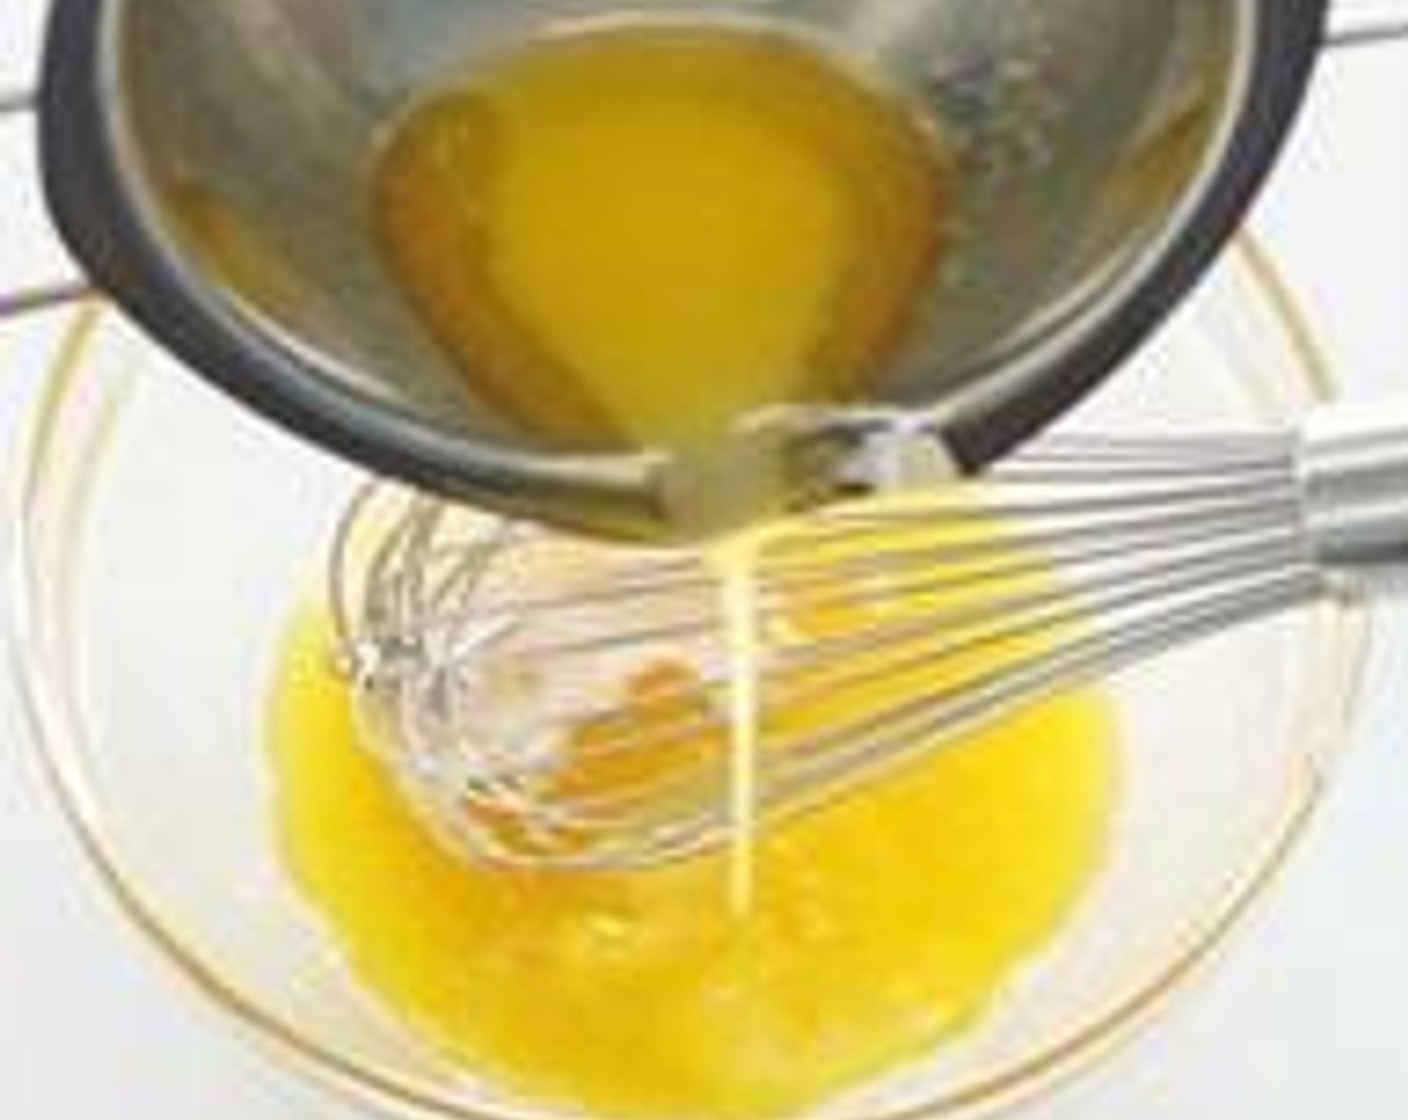 step 2 In a bowl, lightly whisk Egg (1). Add Caster Sugar (2 Tbsp) and Honey (1 Tbsp) and blend well mixture and sugar dissolved. Pour in Butter (3 Tbsp) and stir well.